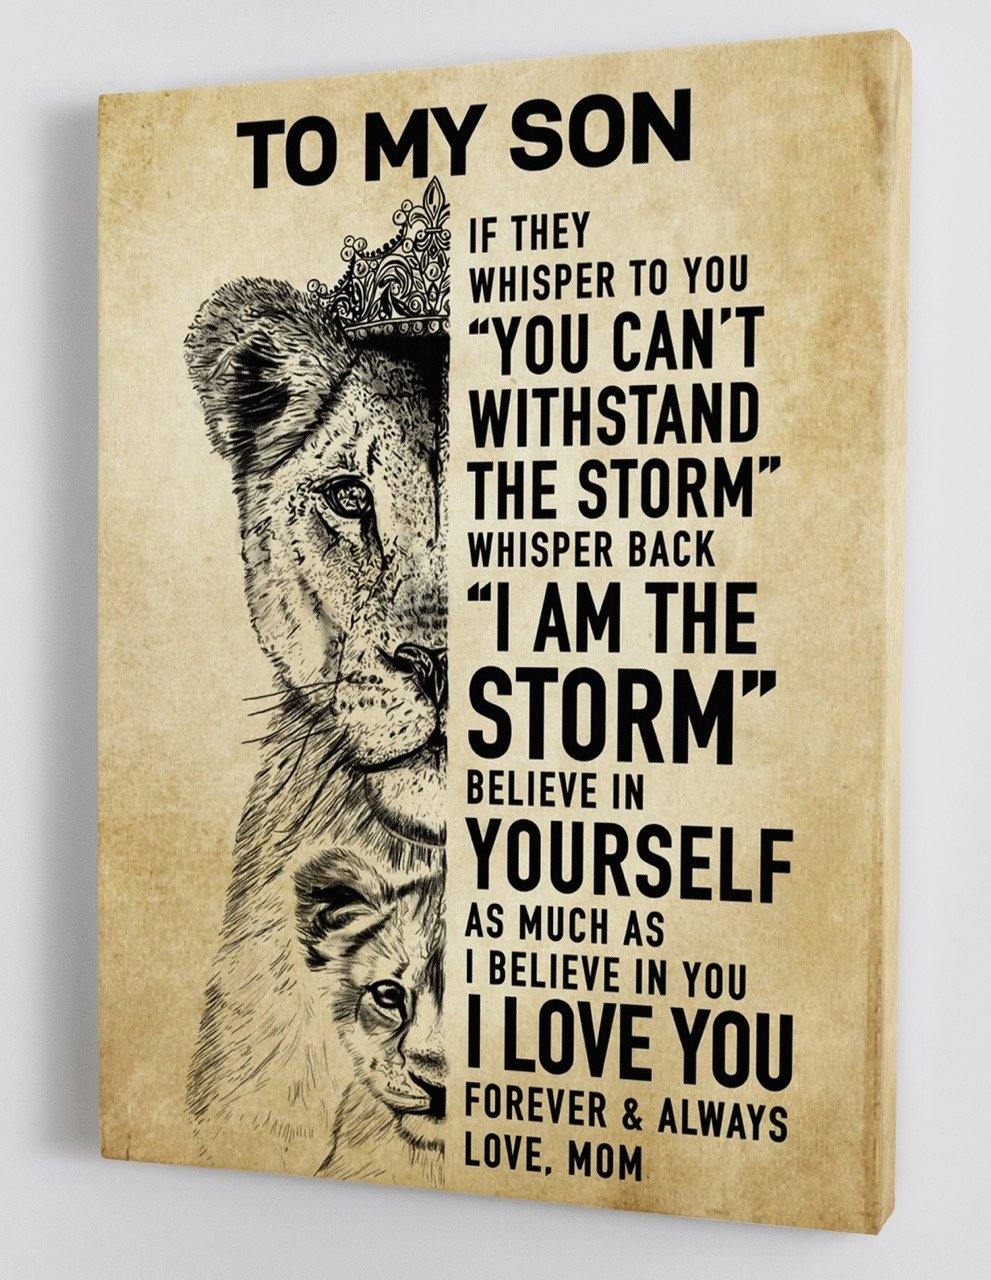 To My Son - From Mom - Framed Canvas Gift MS014 - DivesArt LLC